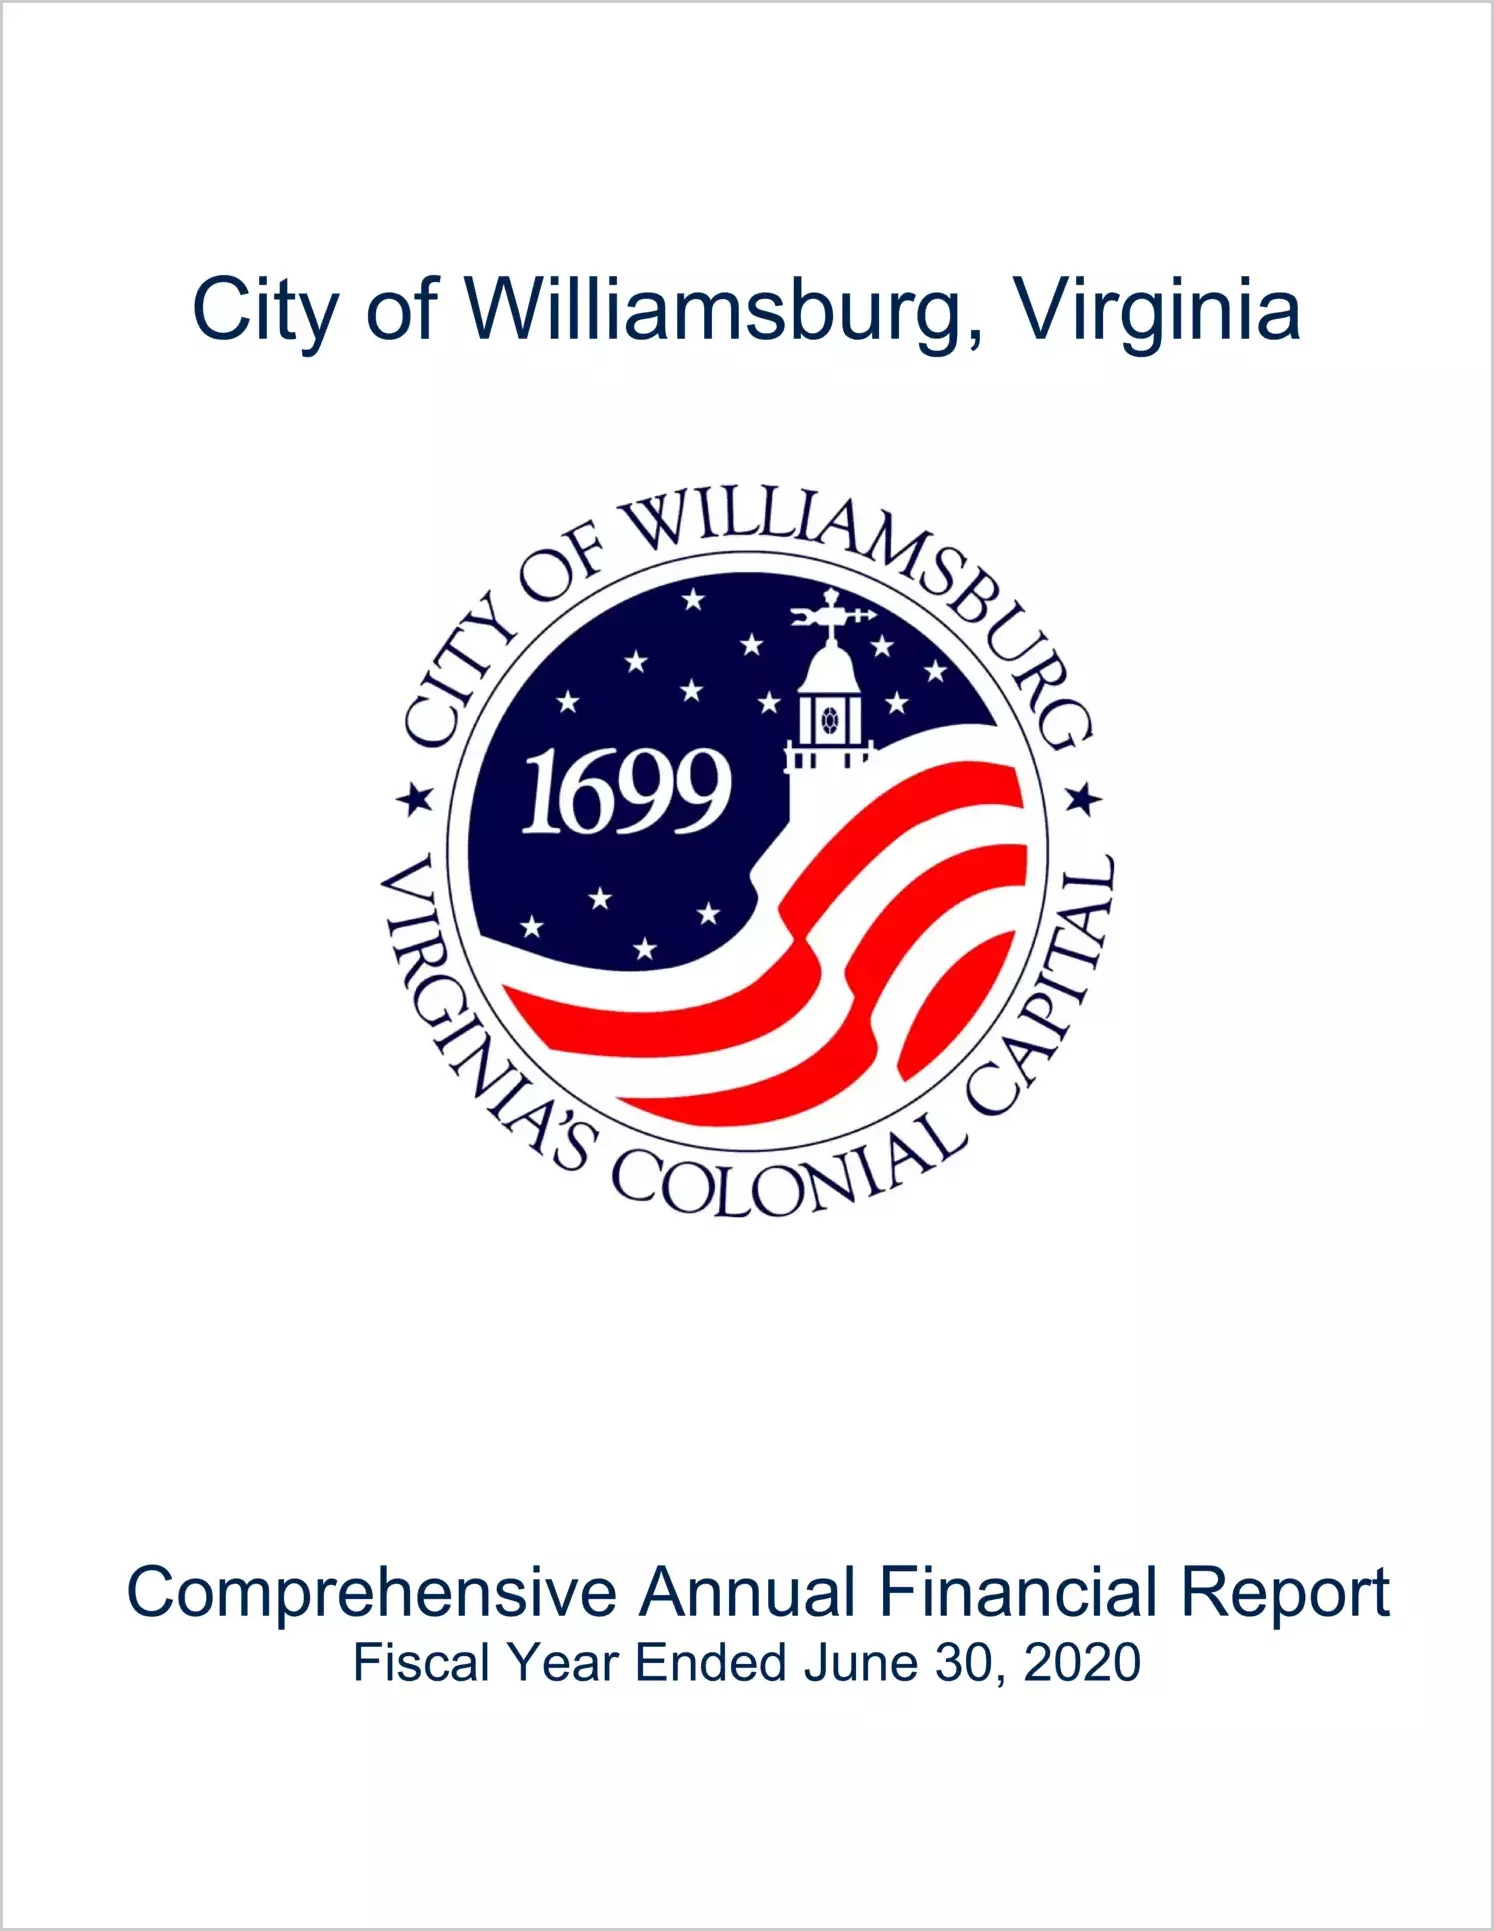 2020 Annual Financial Report for City of Williamsburg